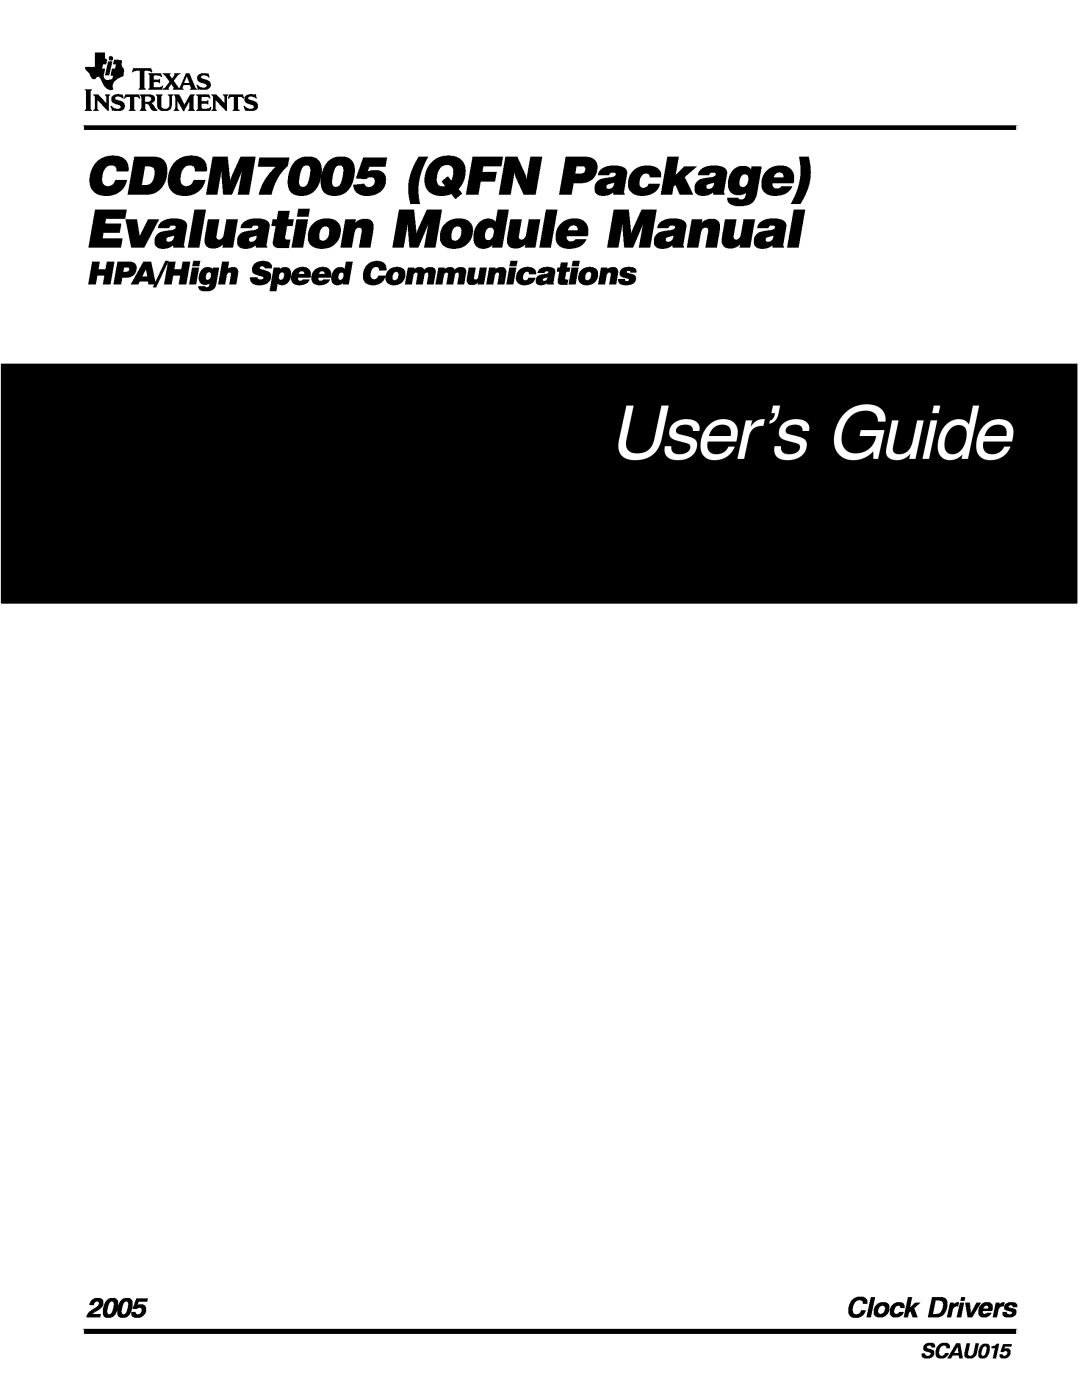 Texas Instruments manual User’s Guide, CDCM7005 QFN Package Evaluation Module Manual, HPA/High Speed Communications 